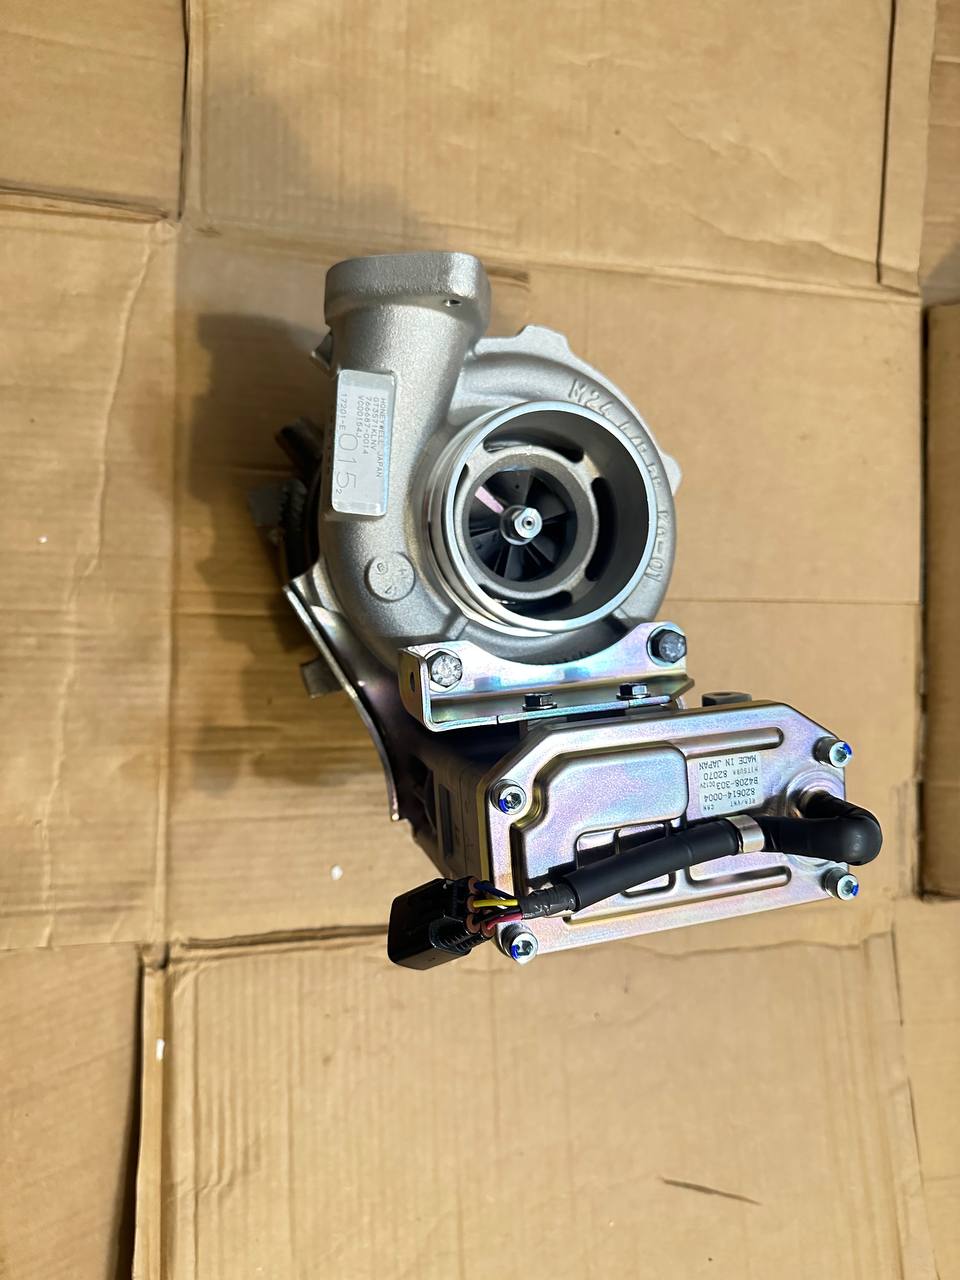 766687-5001 | Genuine Hino® Turbocharger W Actuator For J05 4.6L